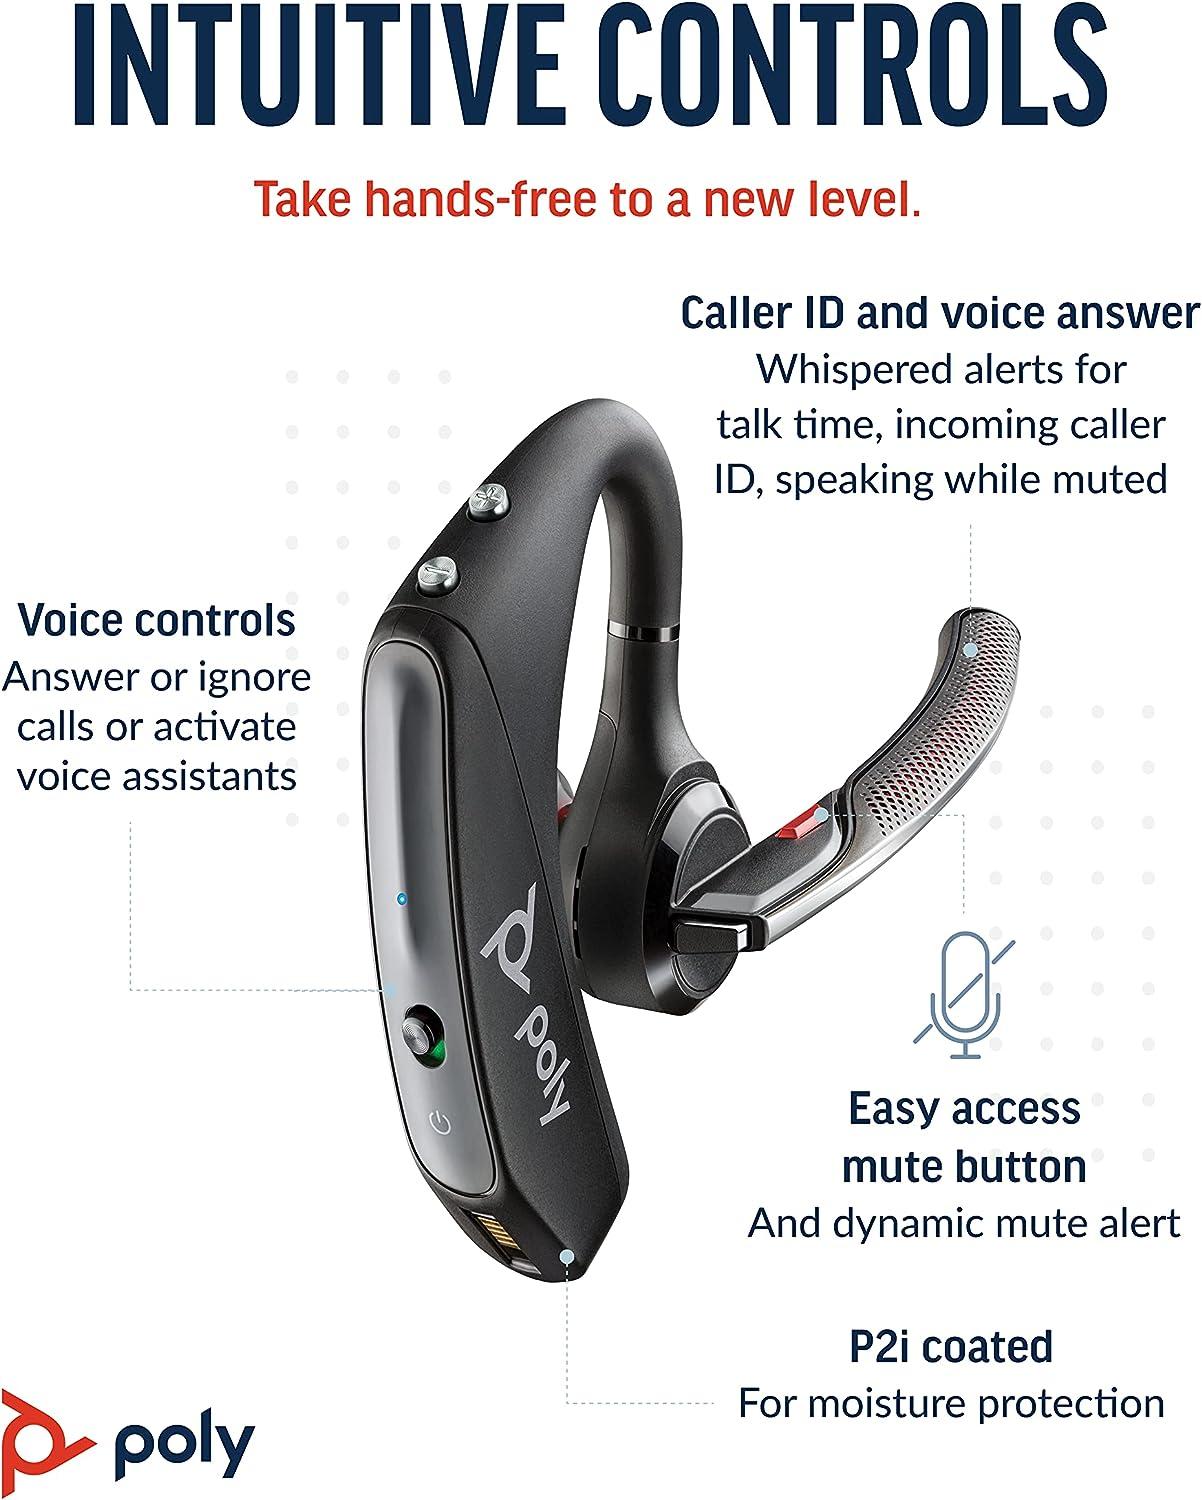 Poly Voyager 5200 Wireless Headset (Plantronics) - Single-Ear Bluetooth  Headset w/Noise-Canceling Mic - Ergonomic Design - Voice Controls -  Lightweight - Connect to Mobile/Tablet via Bluetooth